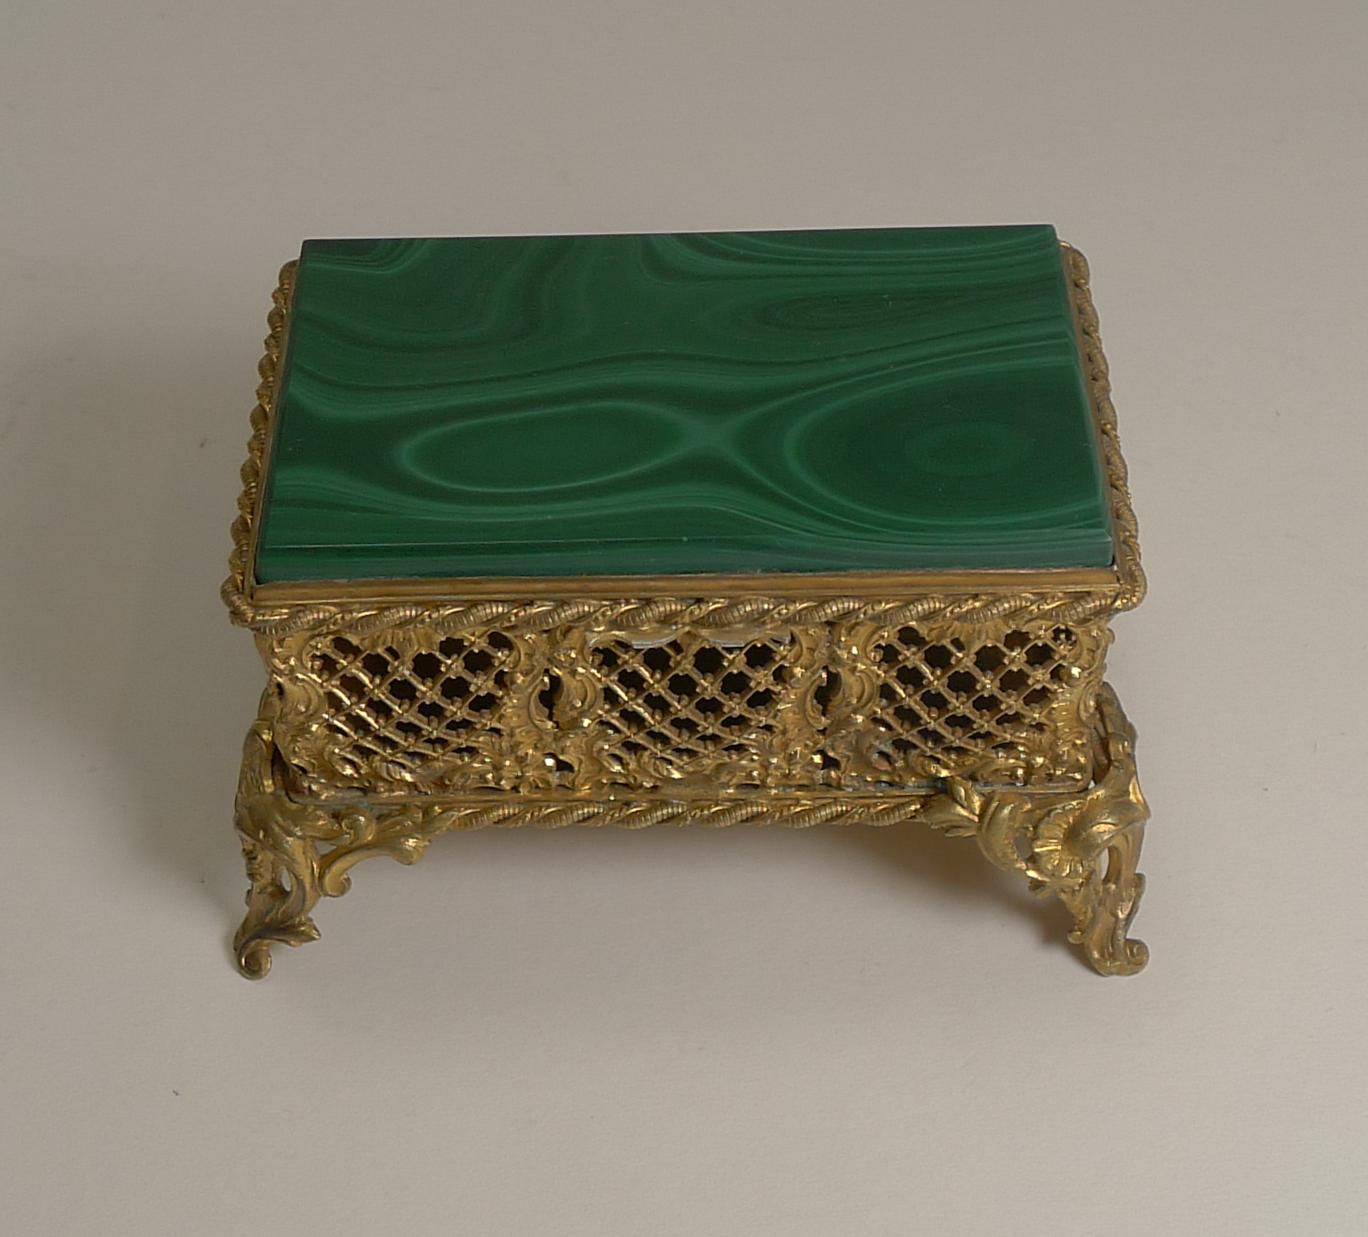 A stunning late 19th century box made from gilded brass or bronze, on four highly decorative legs and the sides intricately pierced of reticulated panels.

The top is inset with a perfectly preserved tablet of Russian Malachite without damage and